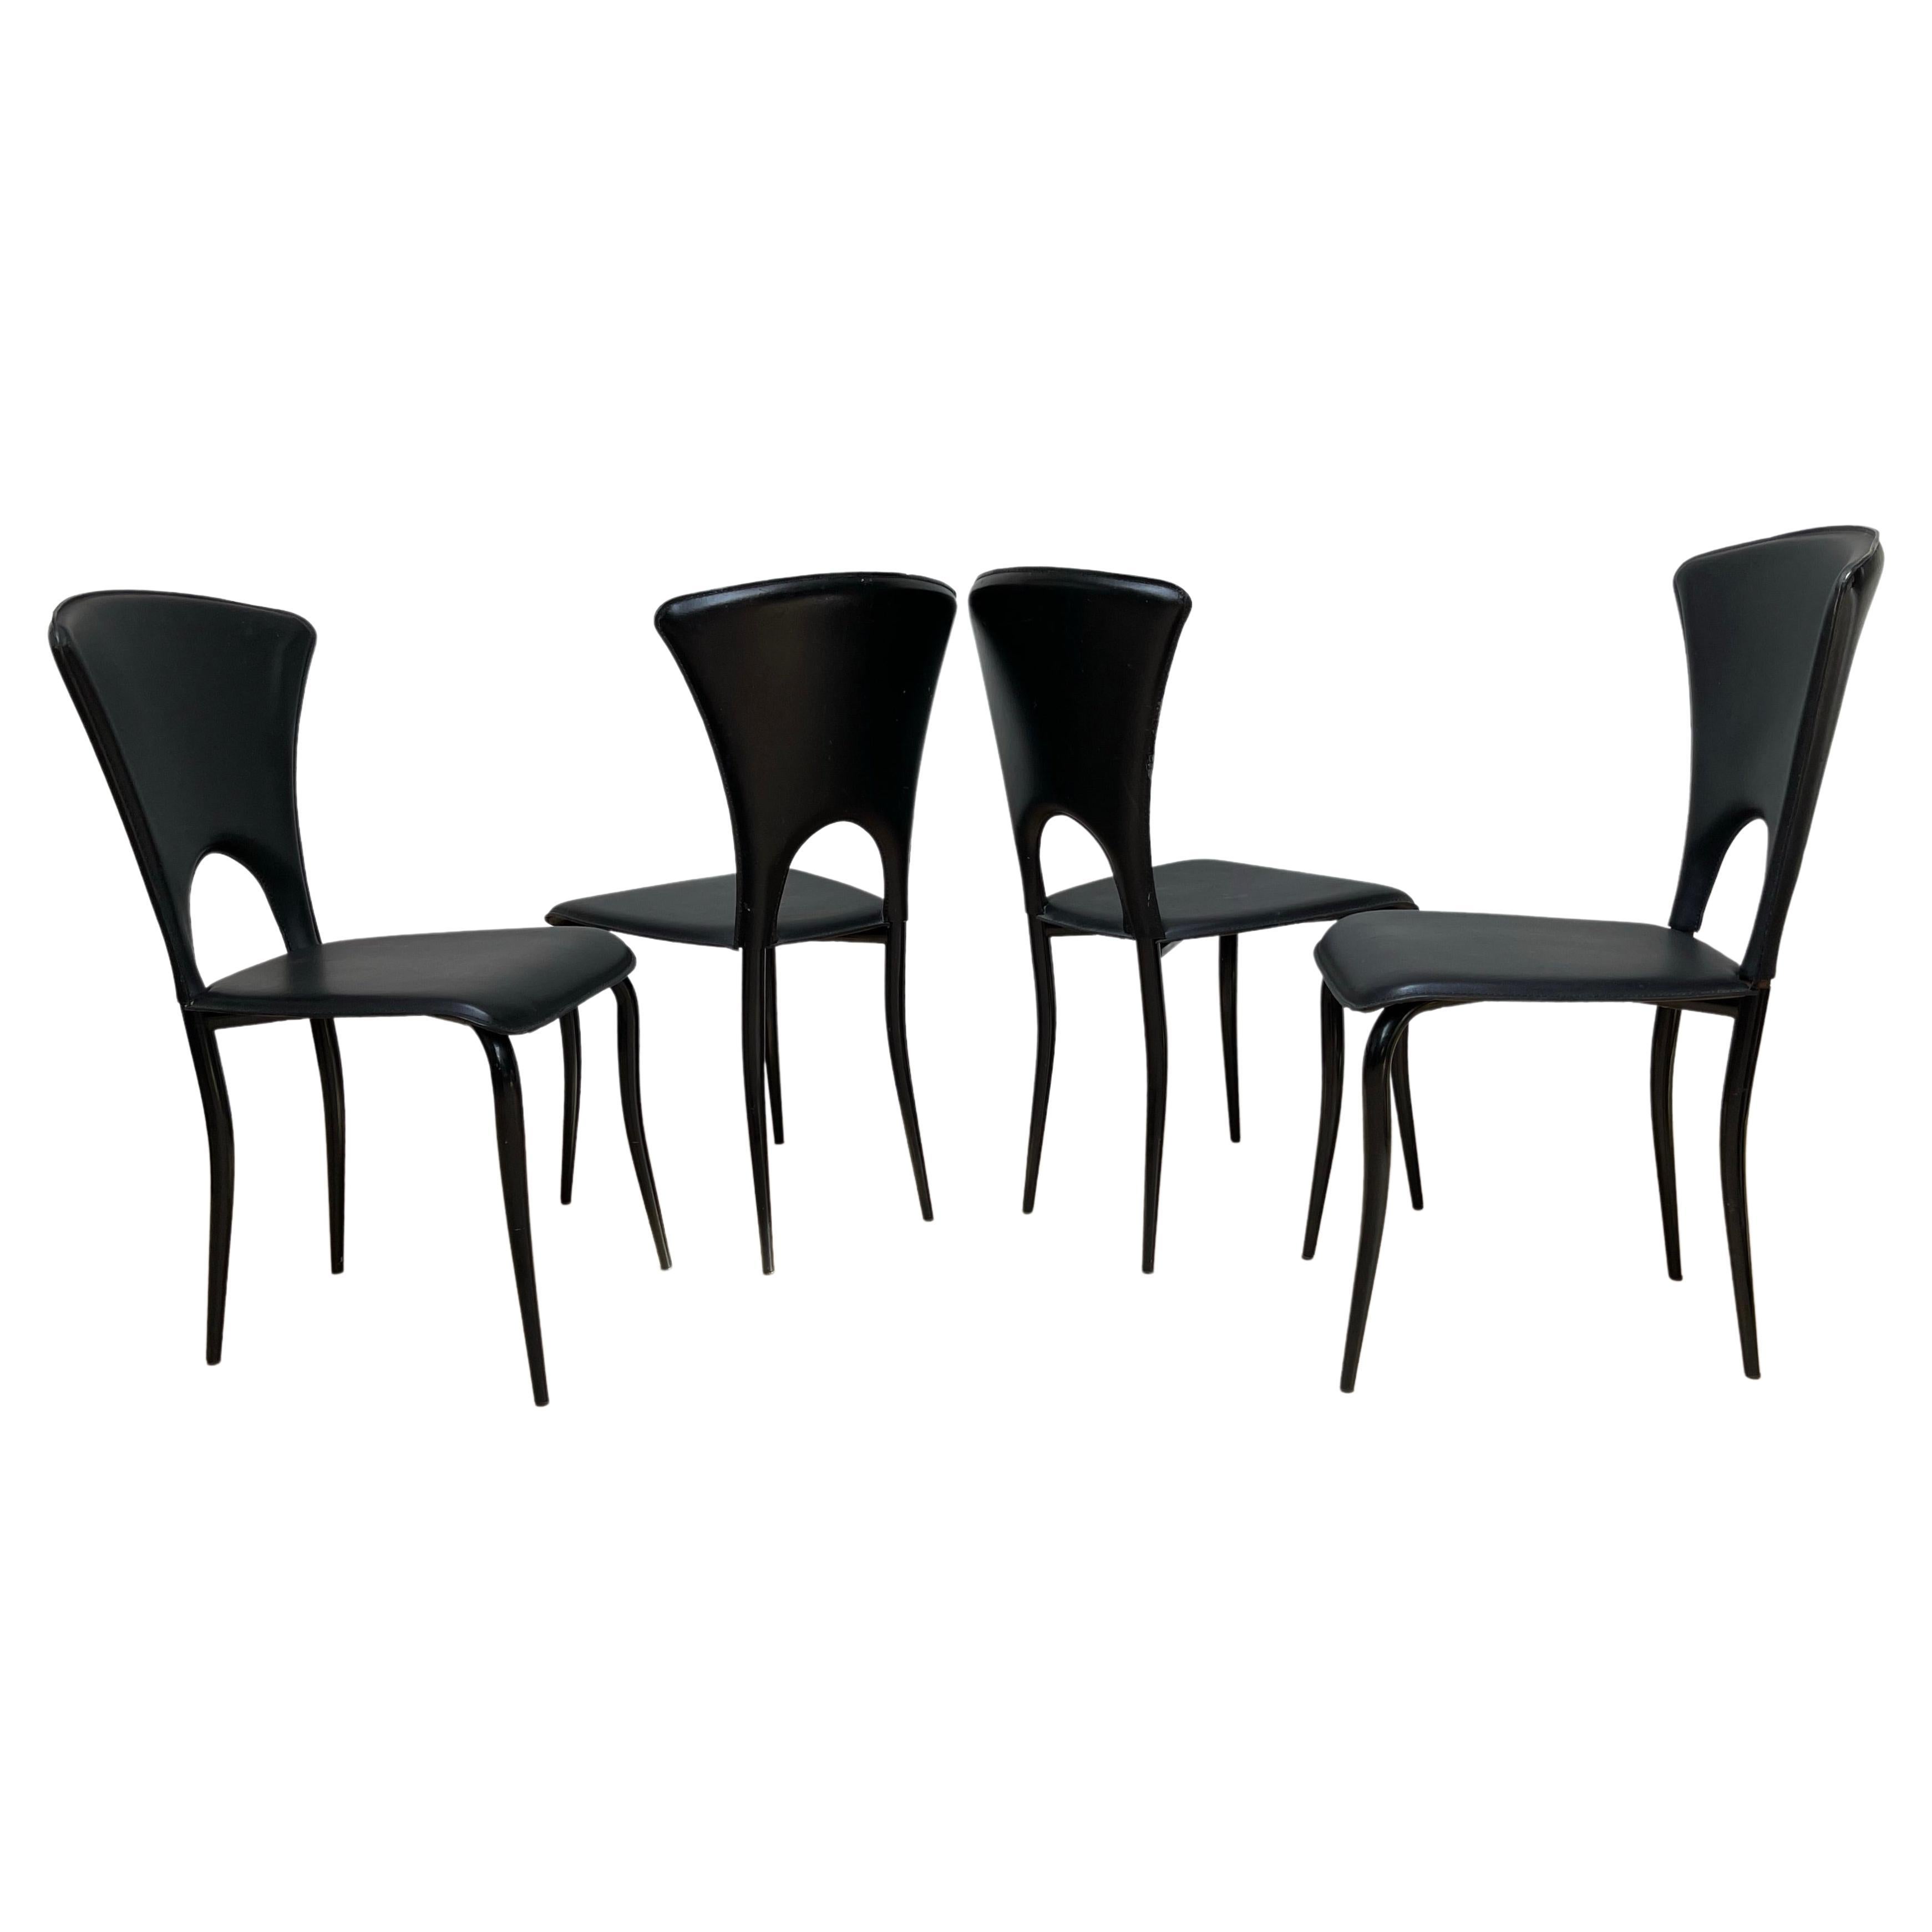 Italian Design Mid-Century Modern Set of 4 Dining Chairs w. Black Leather Seats For Sale